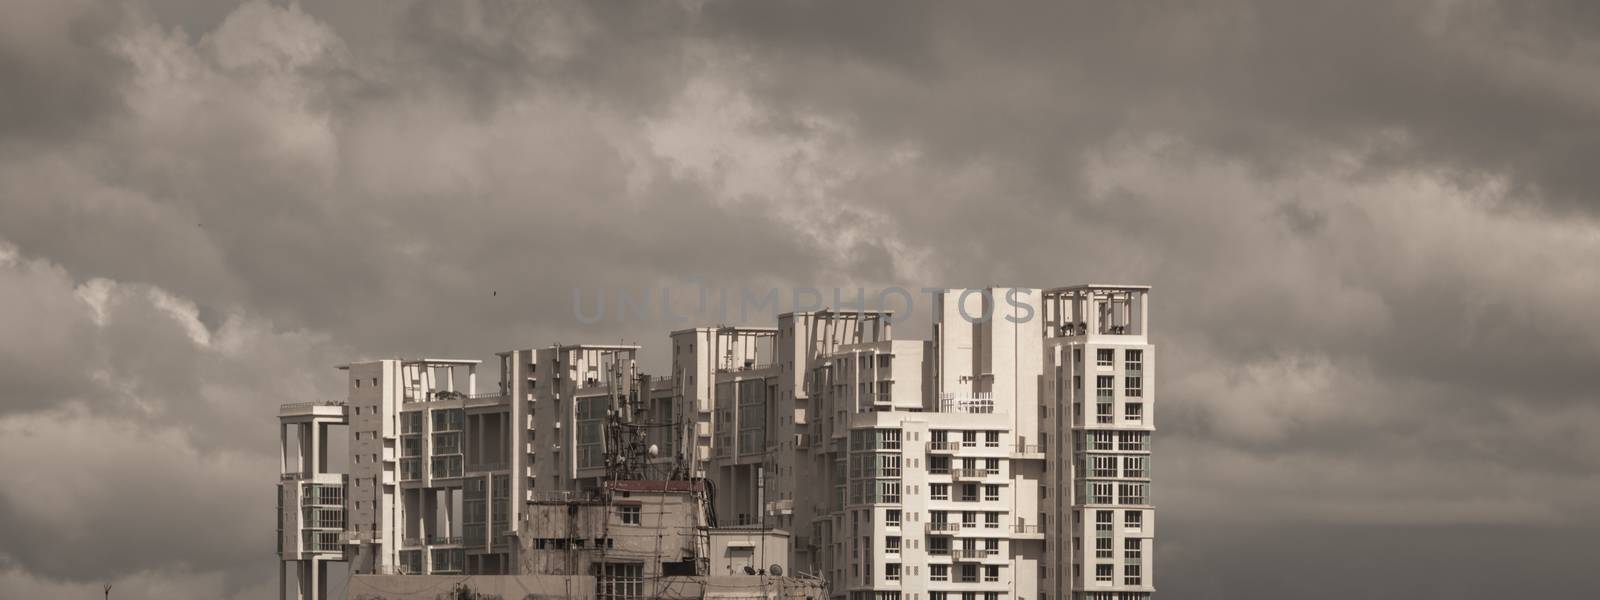 Delay Monsoon Rainy day city. Heavy Stormy rain clouds up above highrise. Storms and dark monsoons typical modern residential skyscrapers. Kolkata, Bengal India. A landscape nature Photography. by sudiptabhowmick